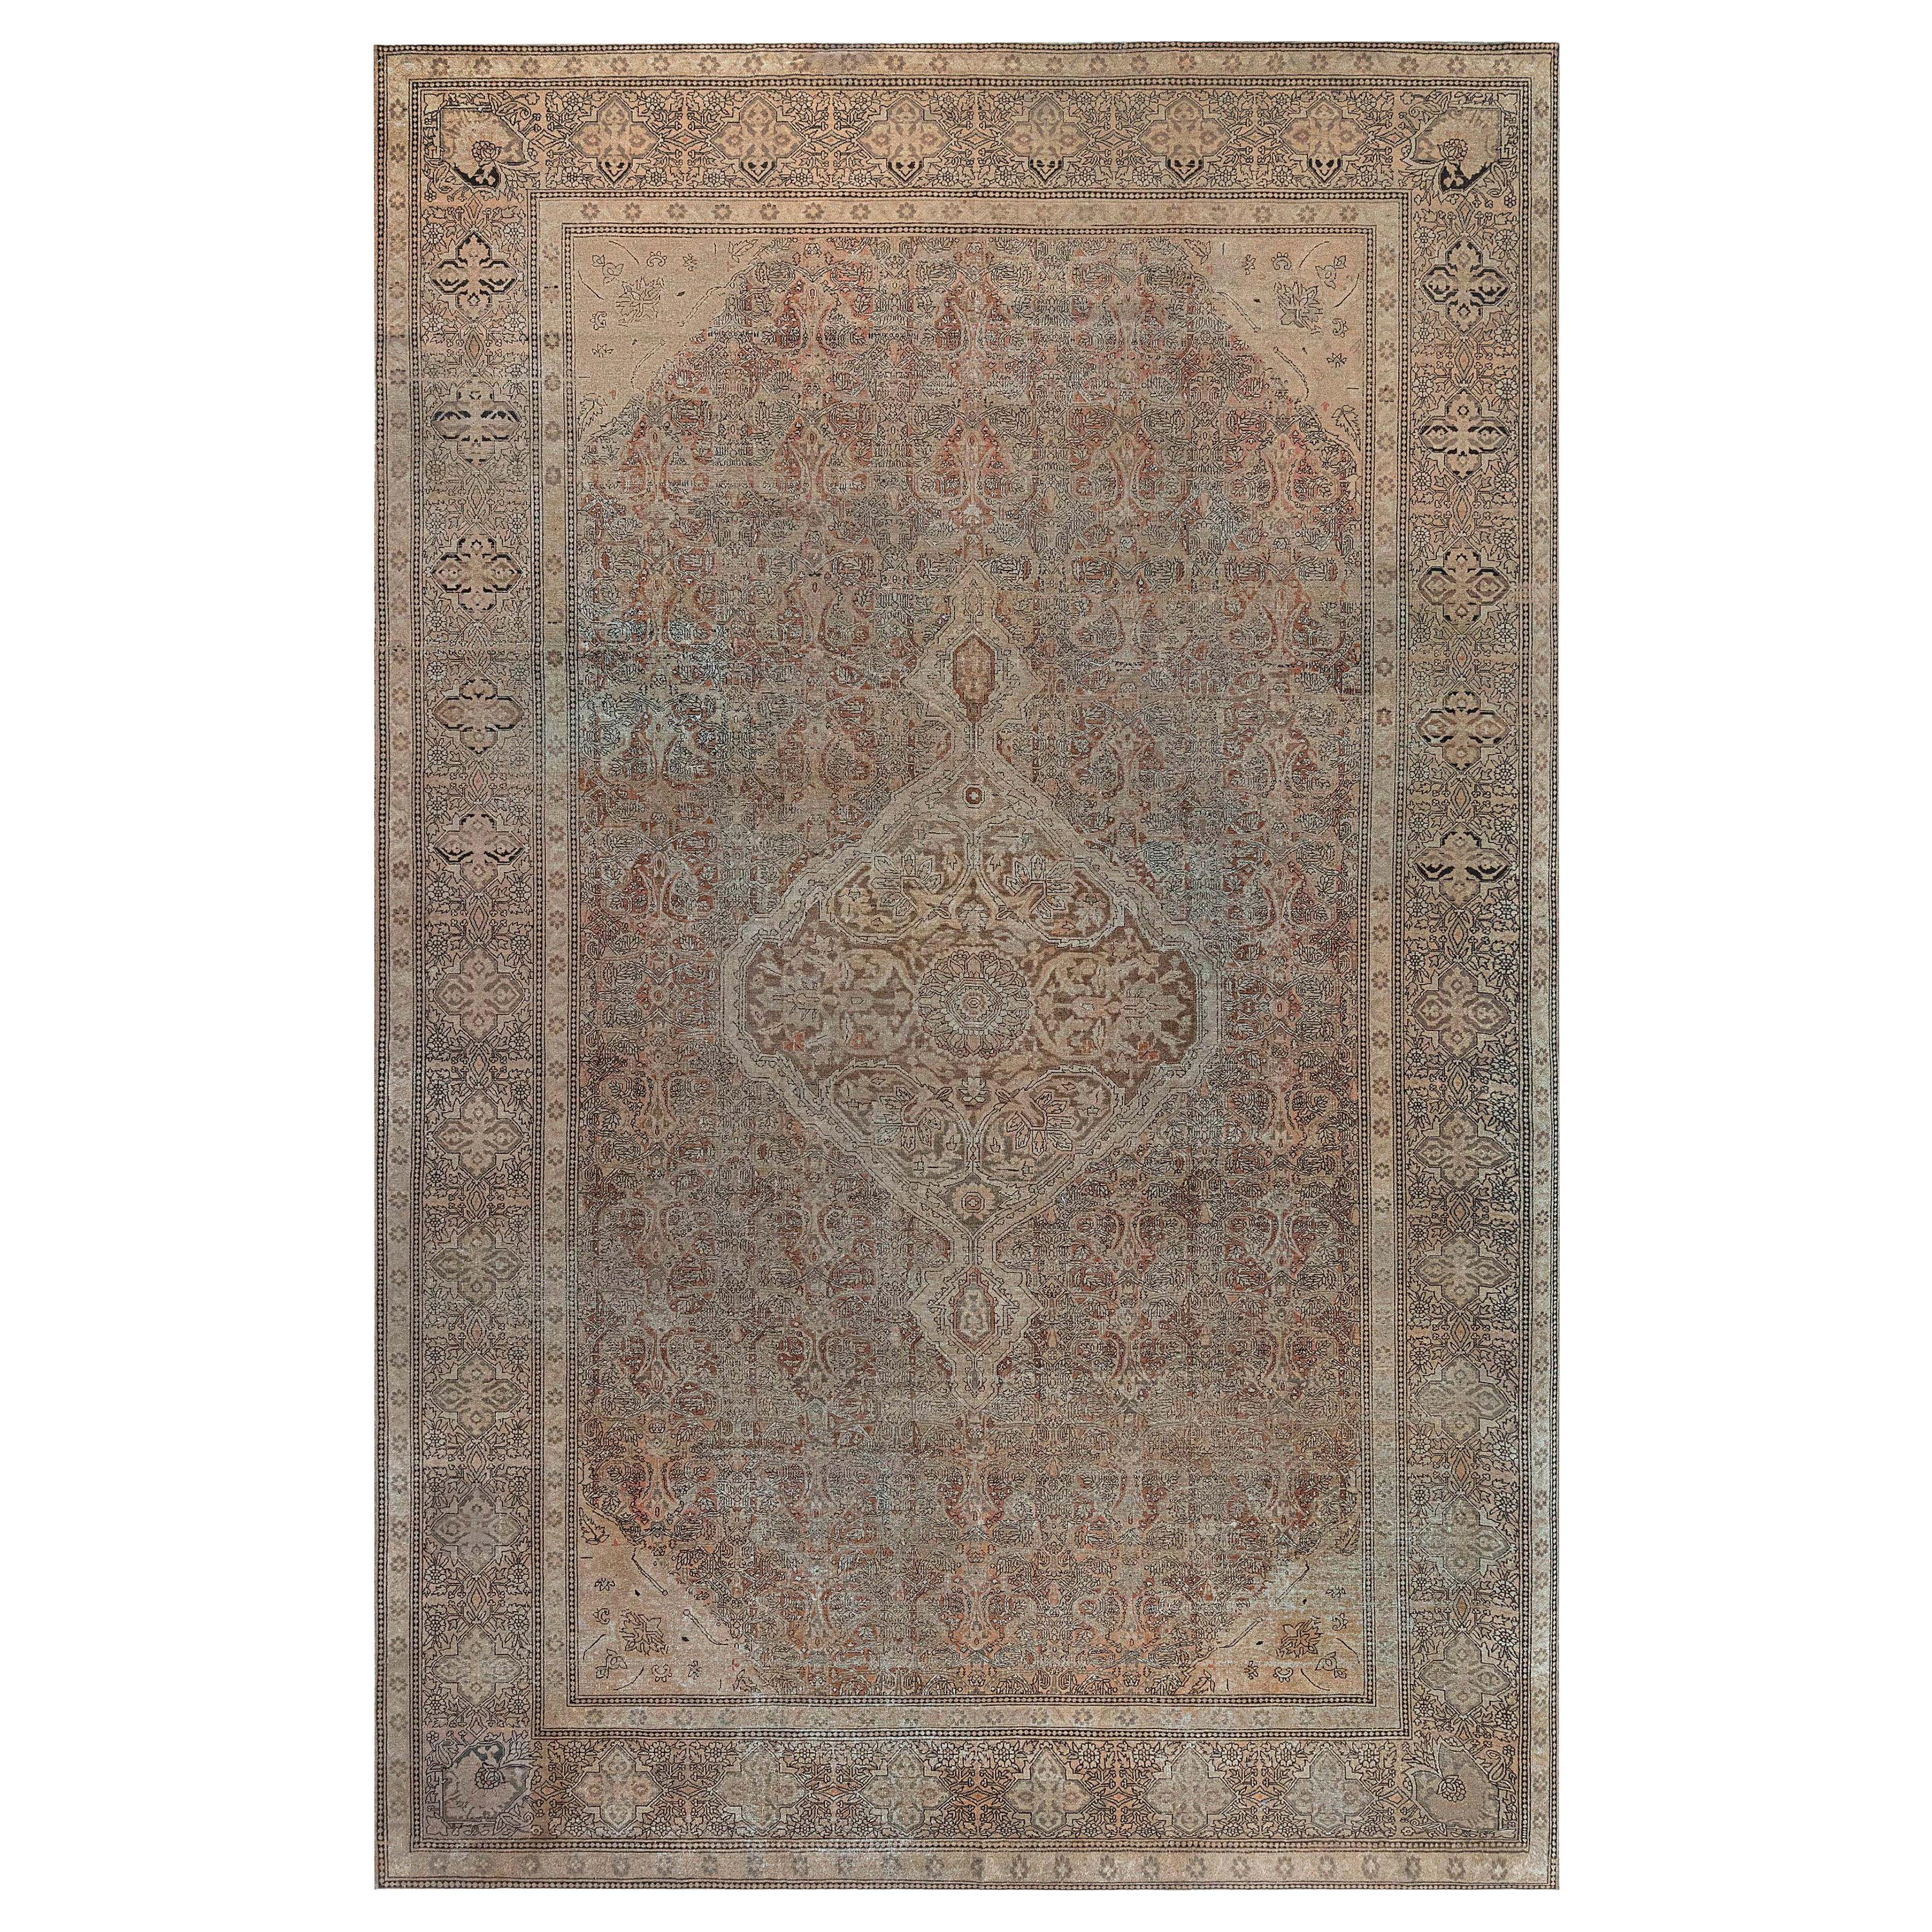 Authentic 19th Century Indian Amritsar Handmade Wool Rug For Sale